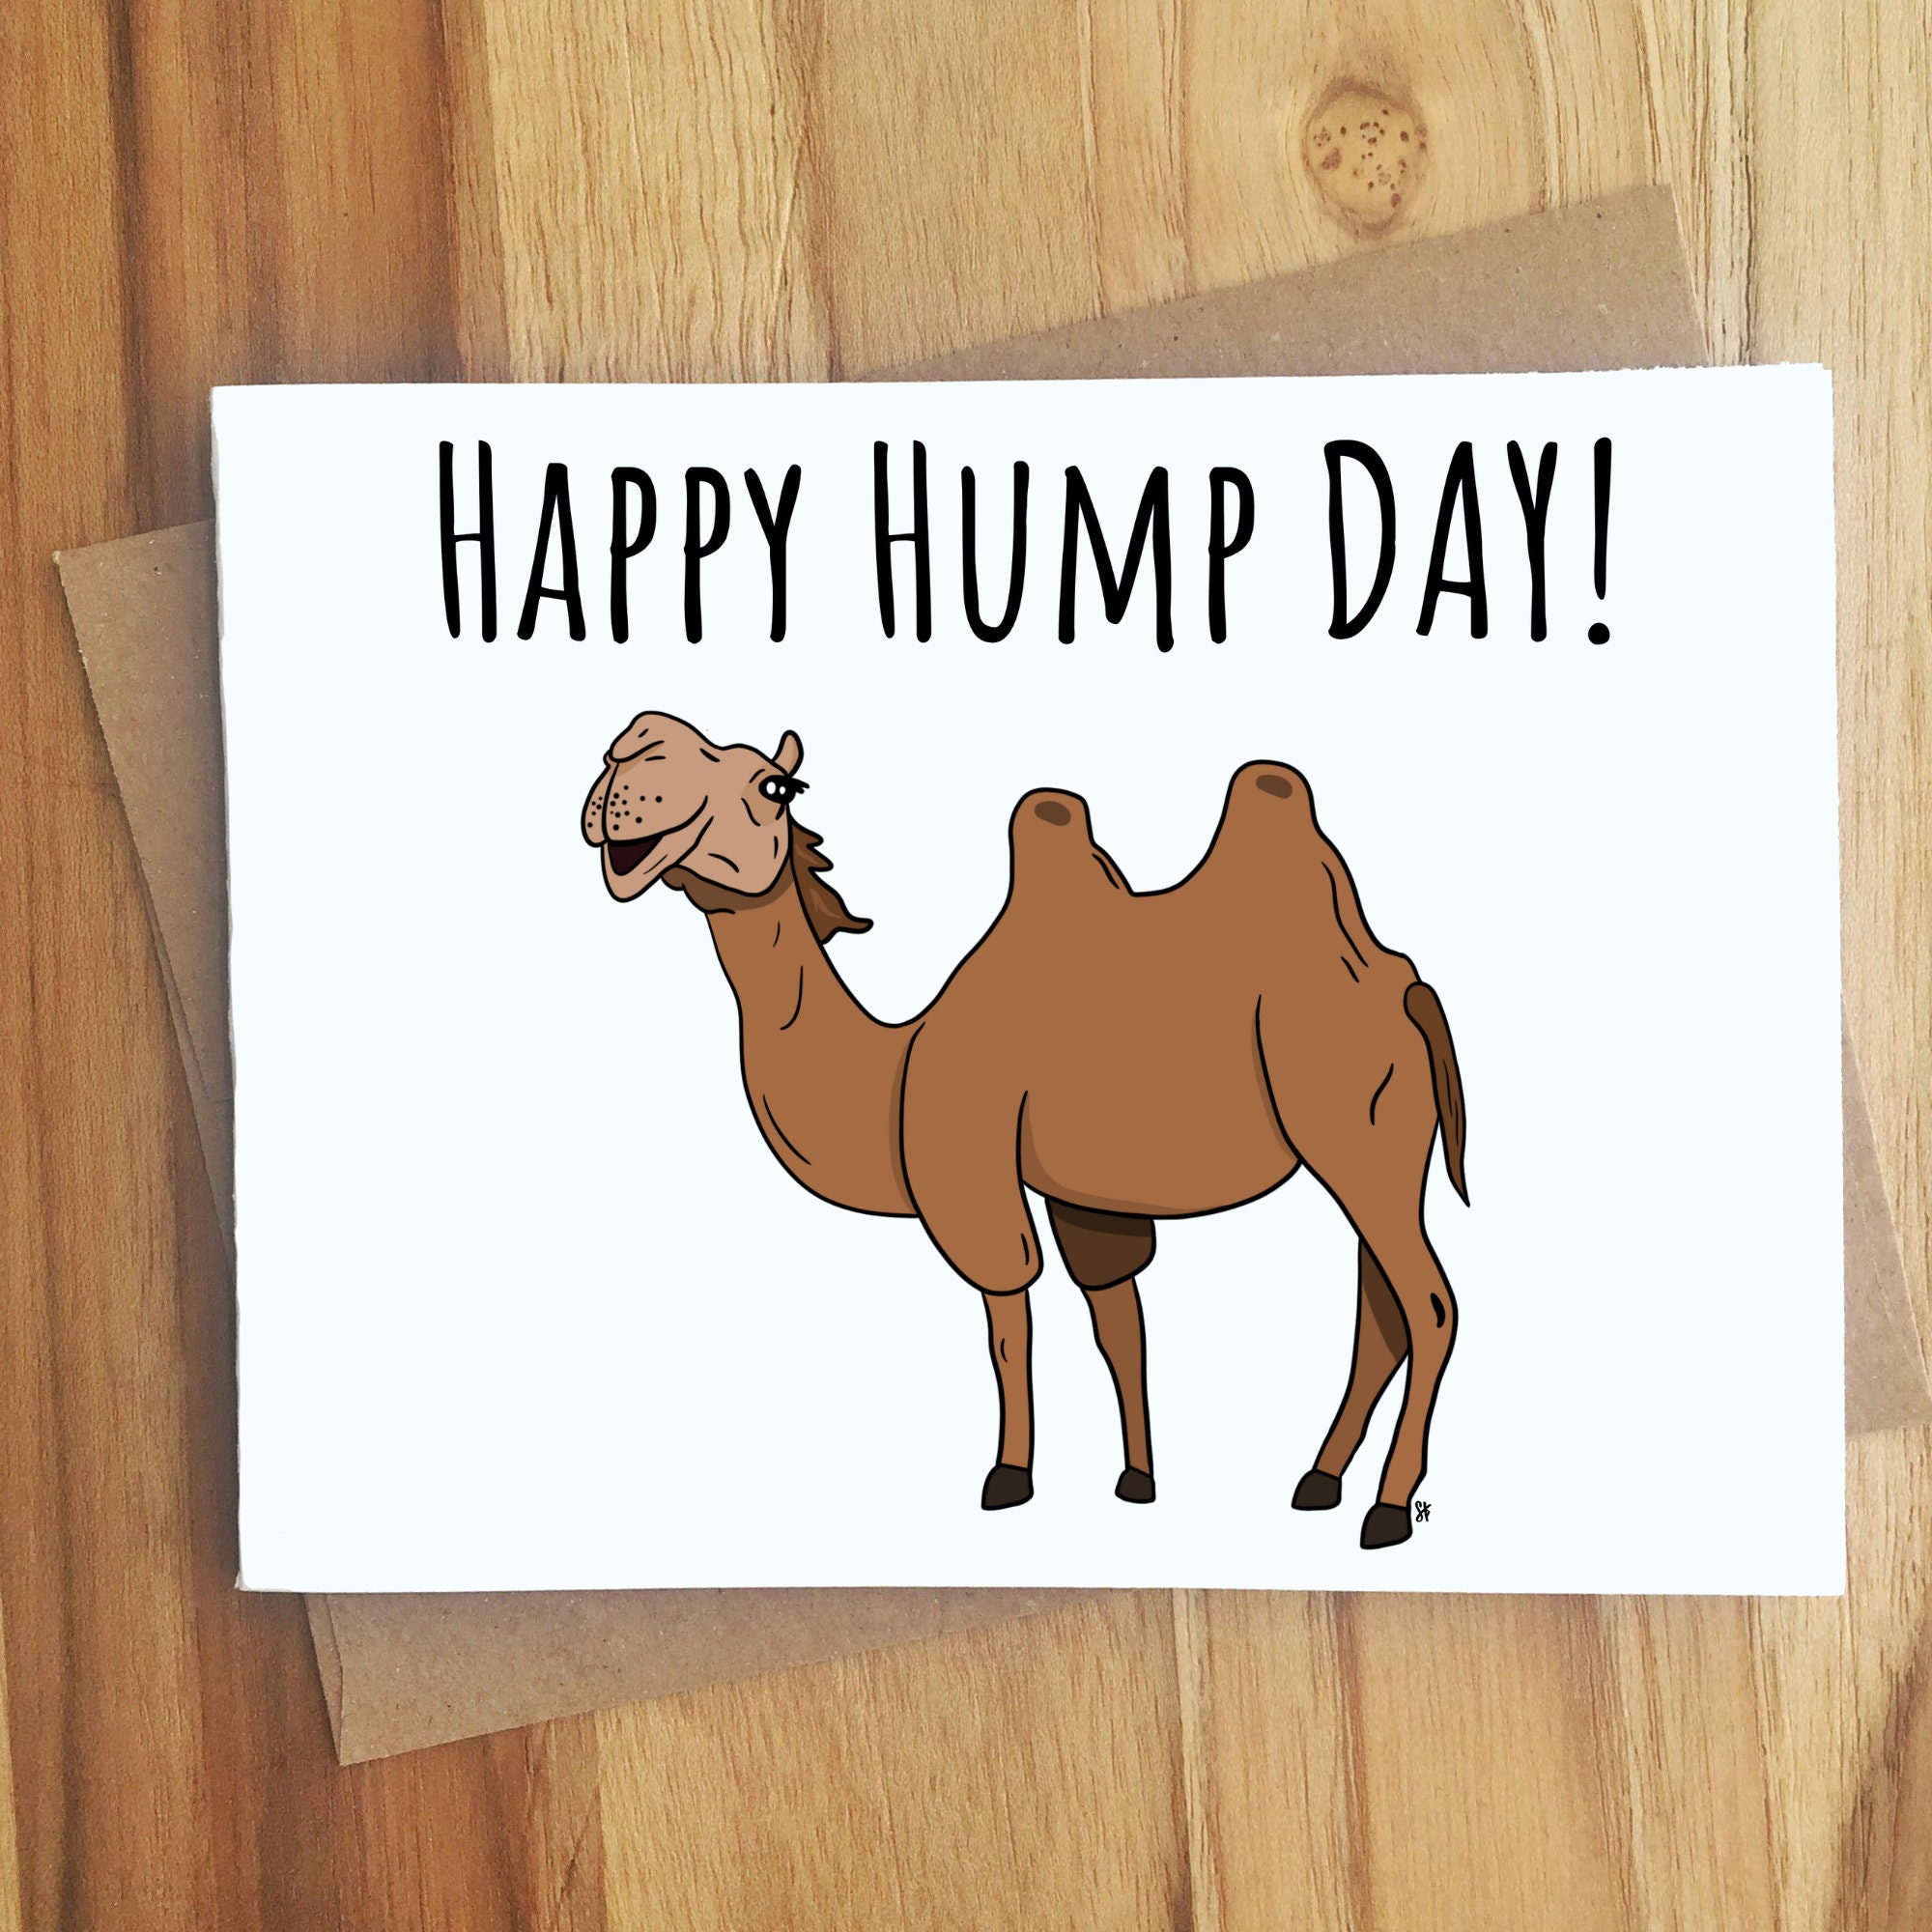 Happy Hump Day Camel Greeting Card / Innuendo Dirty Play on